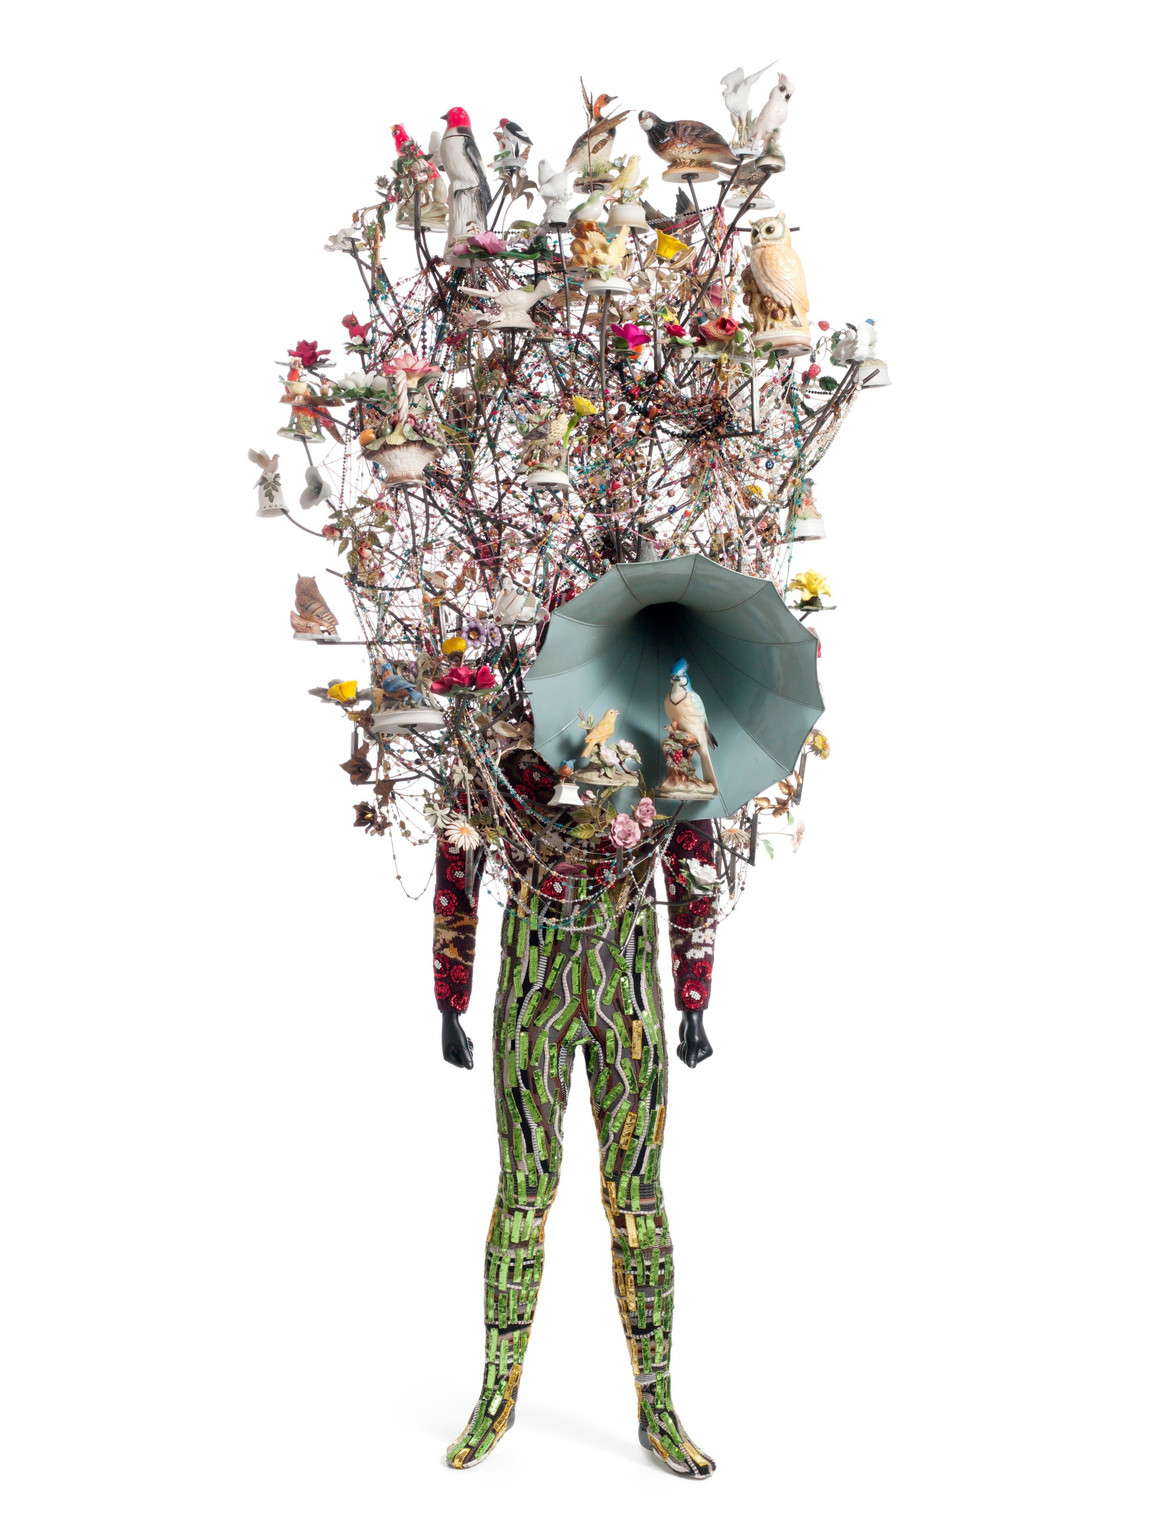 Nick Cave. Soundsuit. 2011. Found objects, knit head and bodysuit, and mannequin, 10' 1" x 42" x 33" (307.3 x 106.7 x 83.8 cm). The Museum of Modern Art, New York. Gift of Agnes Gund in honor of Dr. Stuart W. Lewis. © 2018 Nick Cave. Photo: Imaging and Visual Resources Department, MoMA